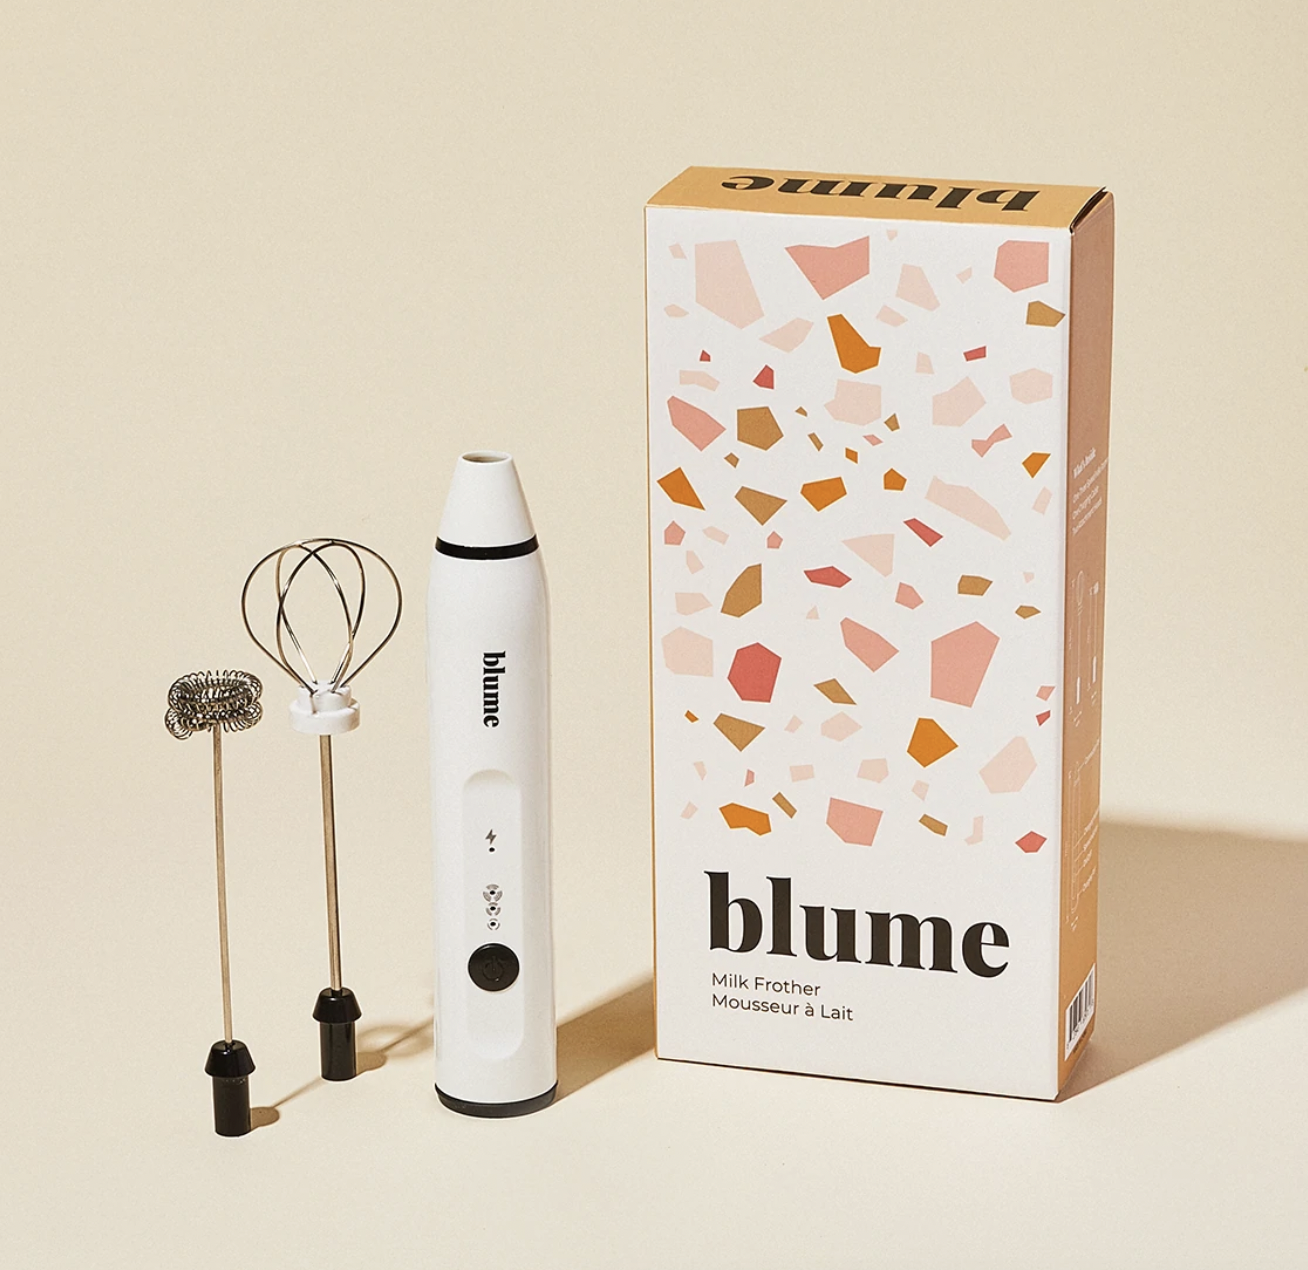 Milk Frother - BLUME